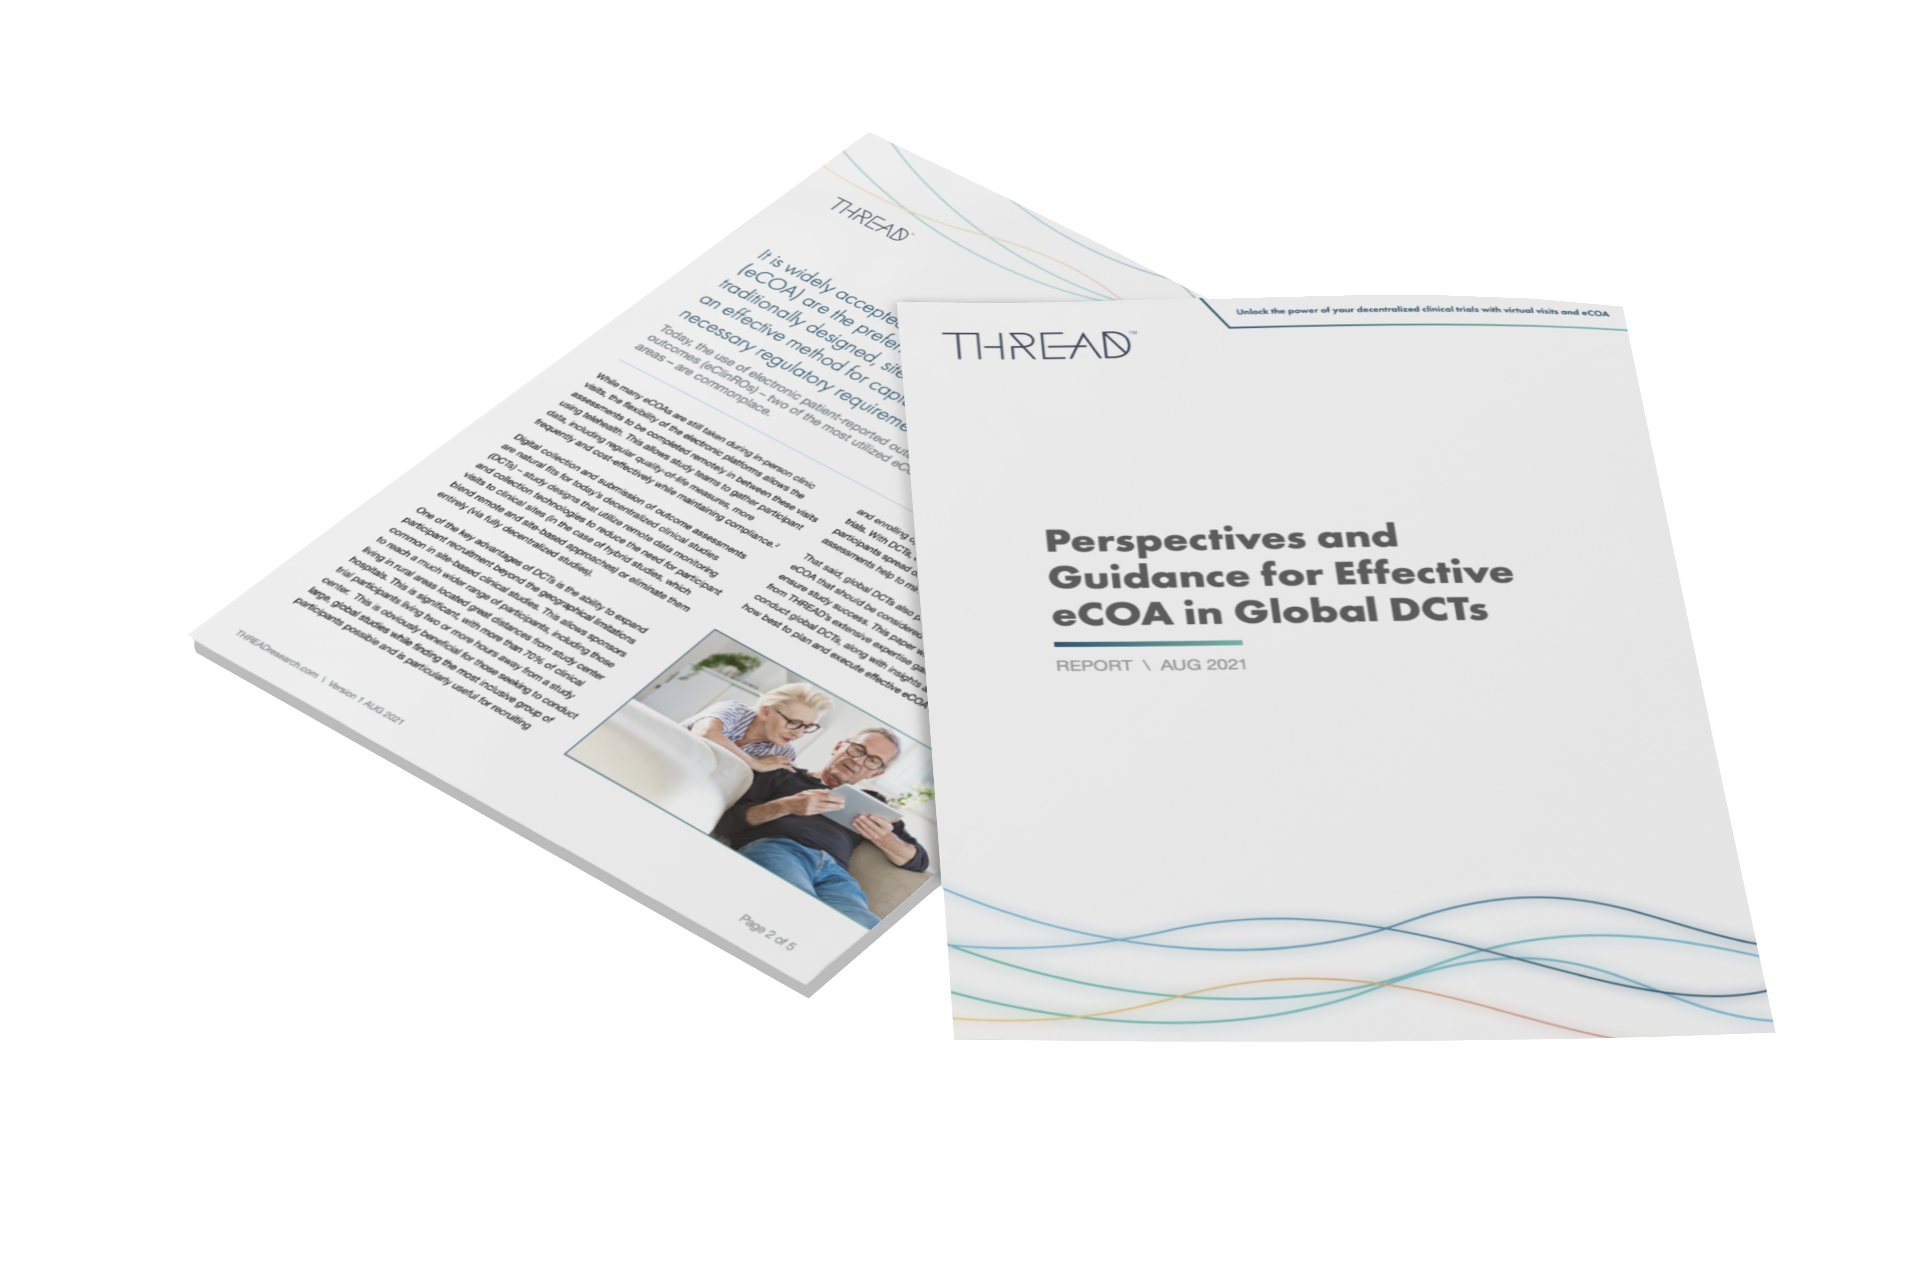 Perspectives and Guidance for Effective eCOA in Global DCTs